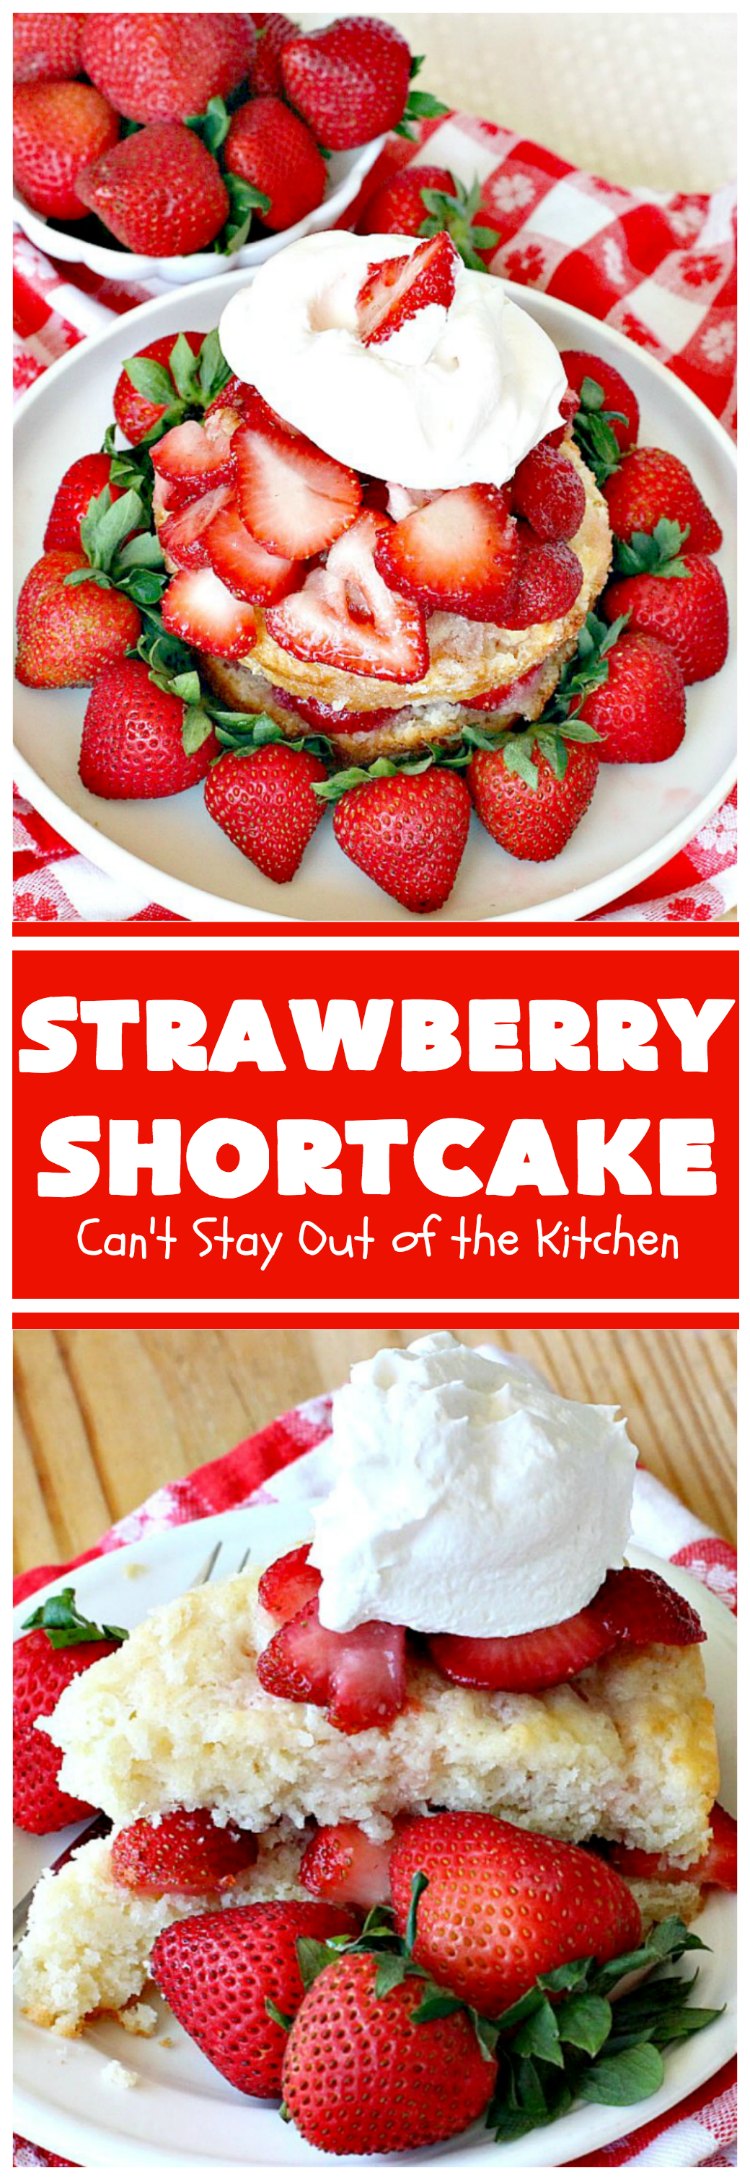 Strawberry Shortcake | Can't Stay Out of the Kitchen